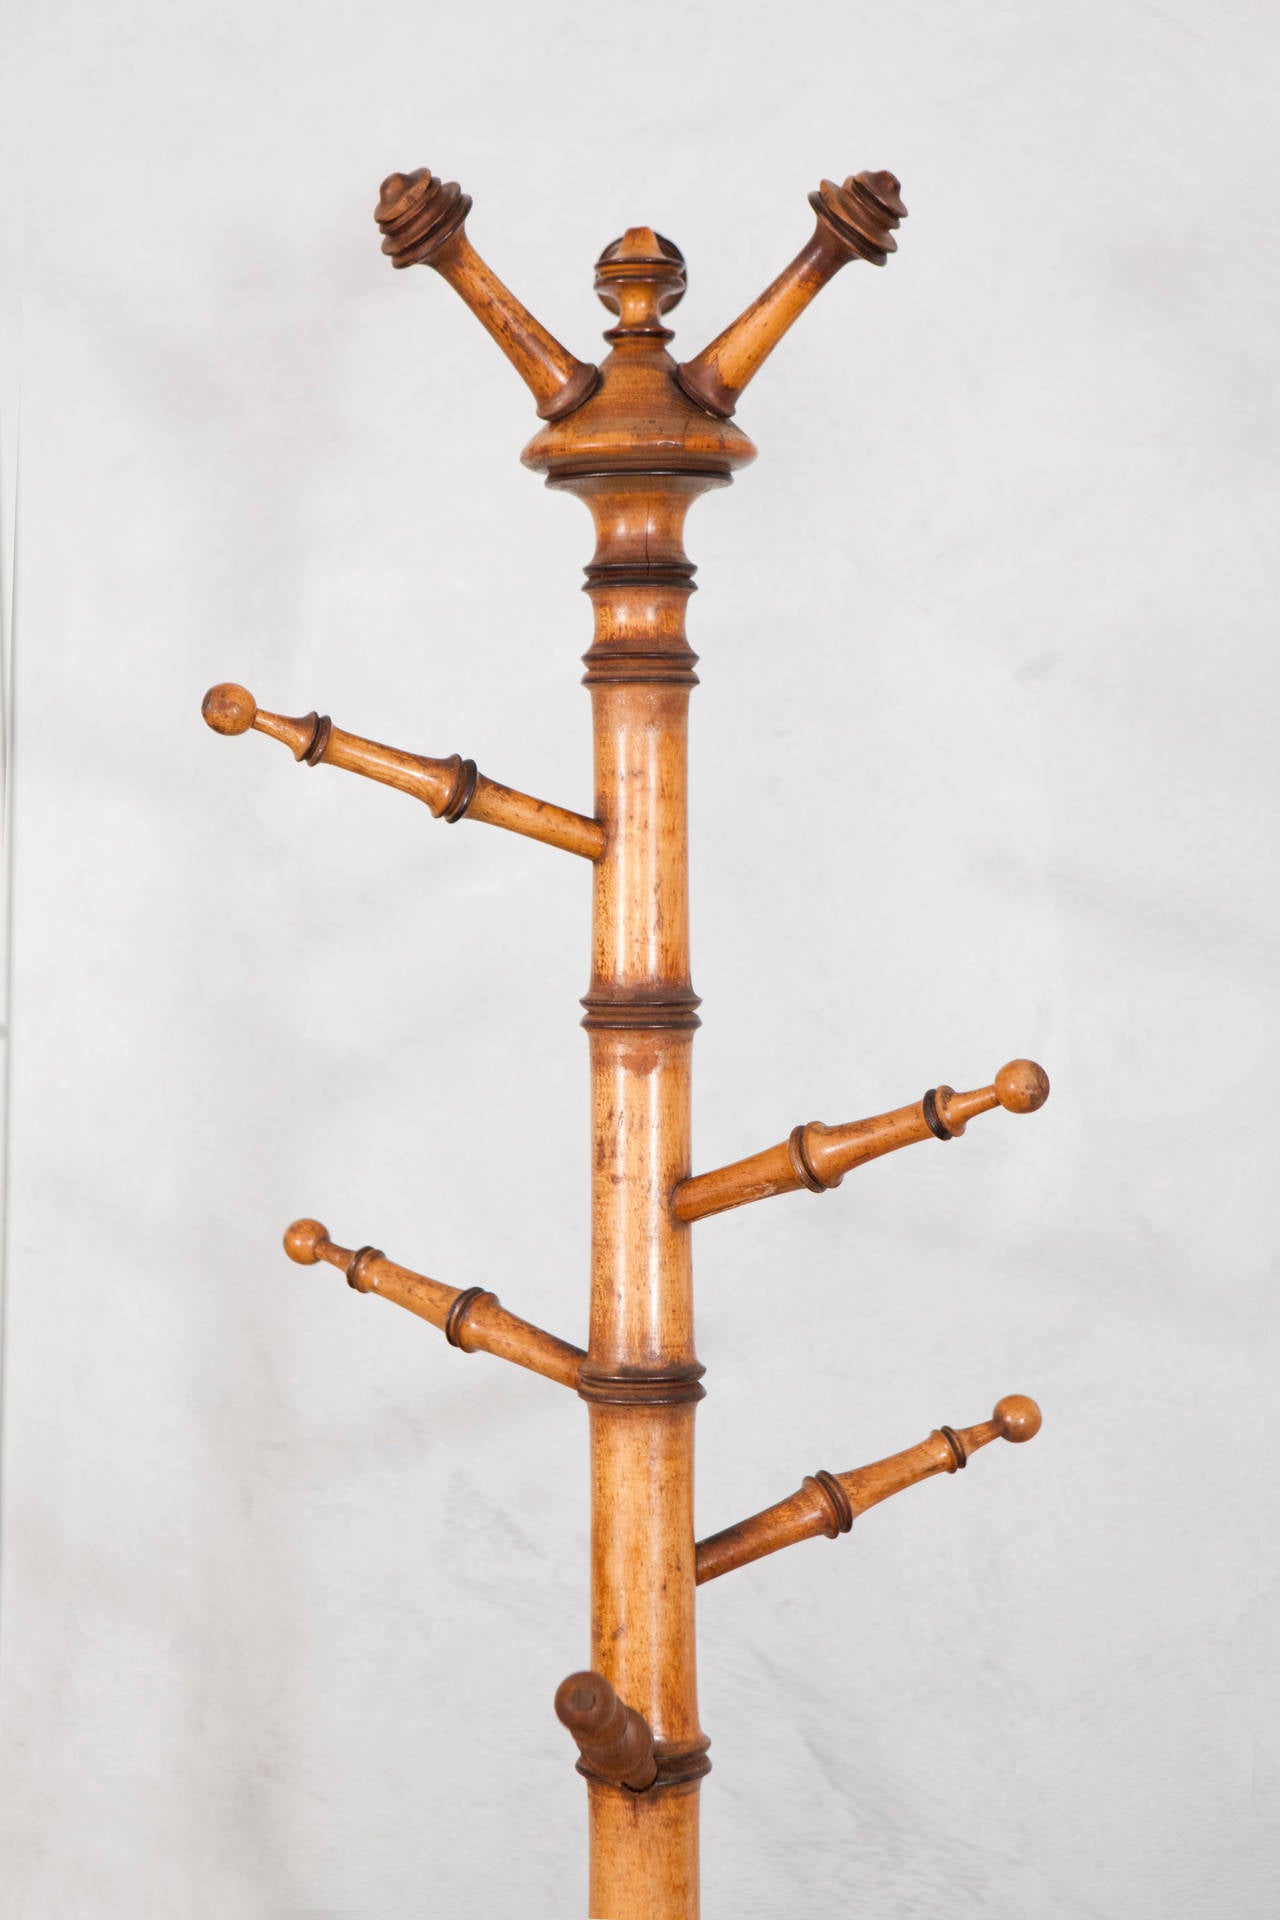 This dynamic branch like designed coat rack is made with turned wood in the faux bamboo manner. Note the delicately turned finials and decorative details in the bottom feet design.